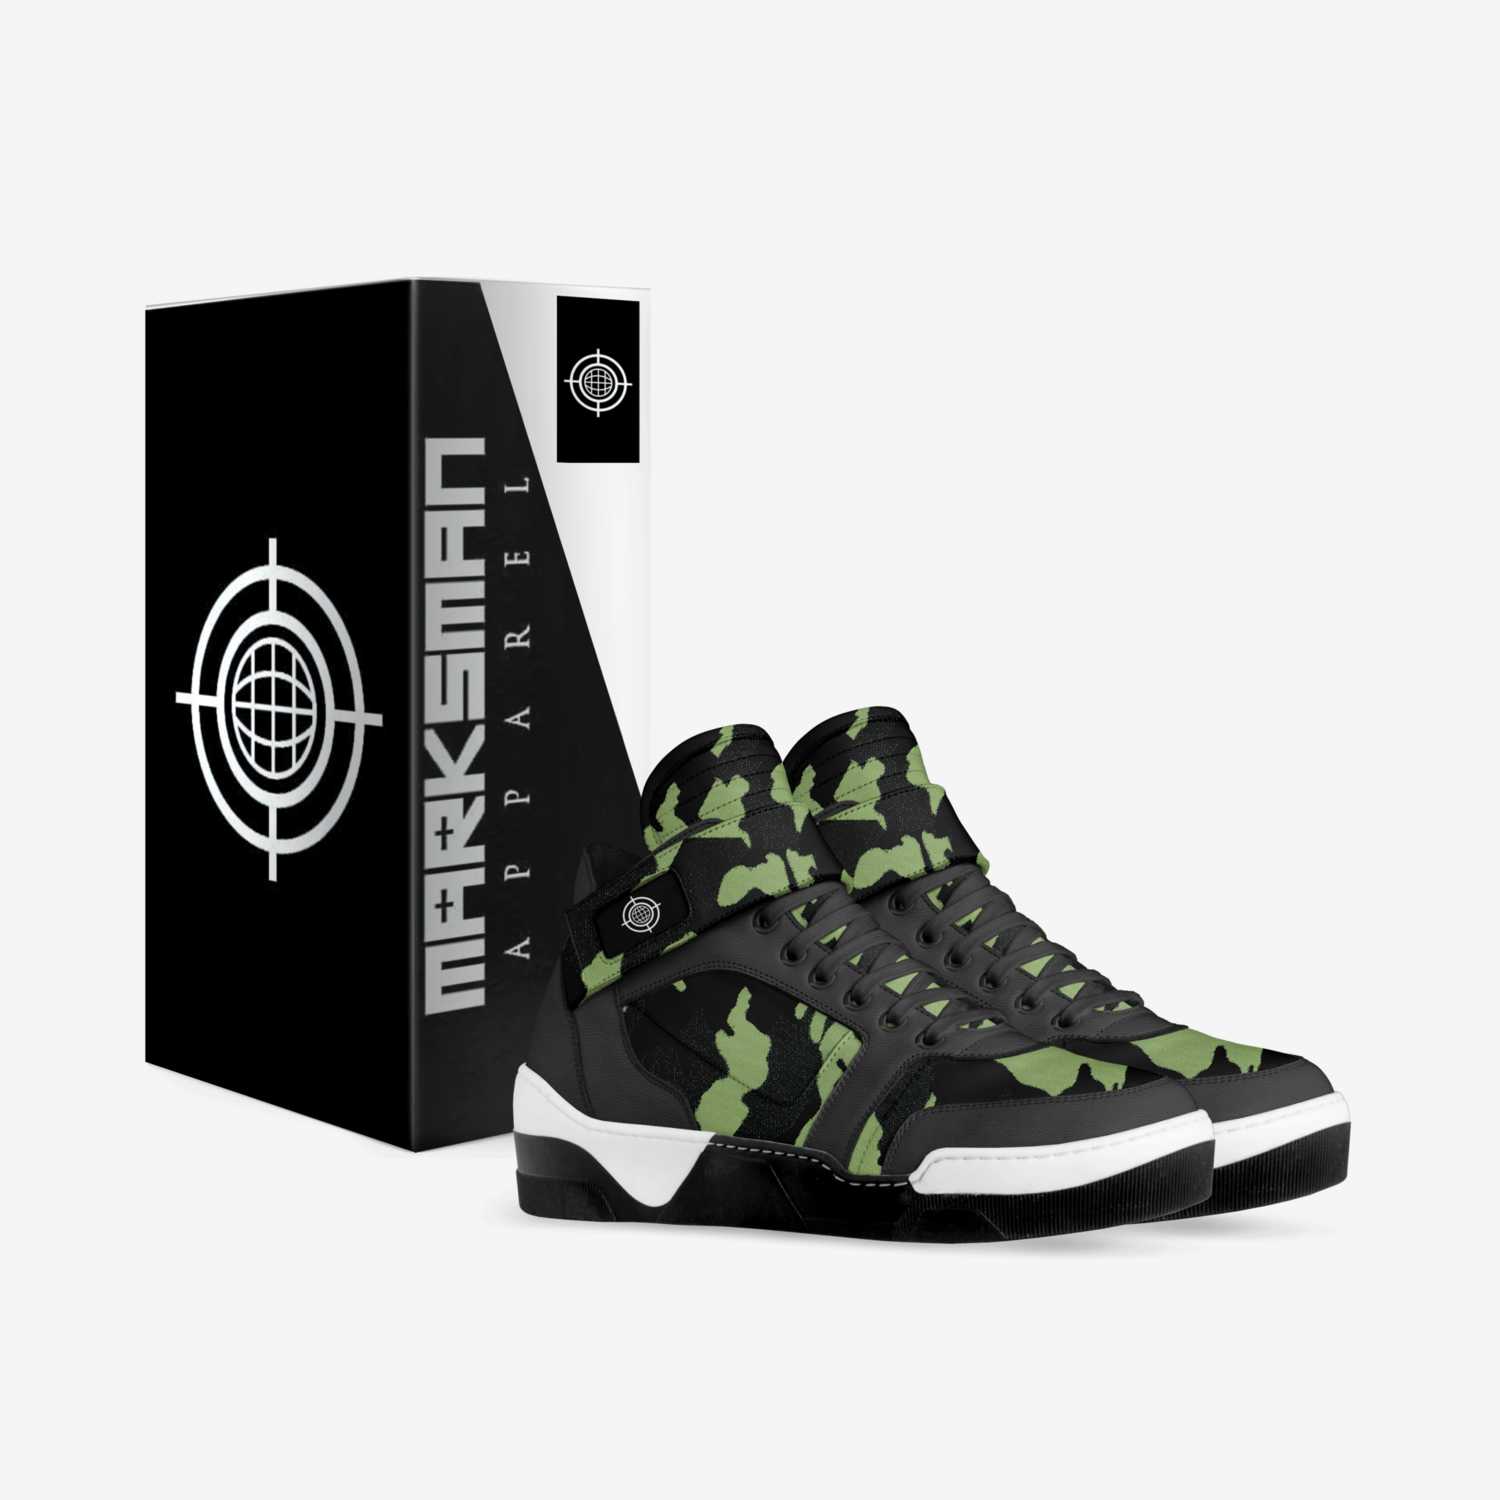 Ultimate Warrior custom made in Italy shoes by Marksman Apparel | Box view